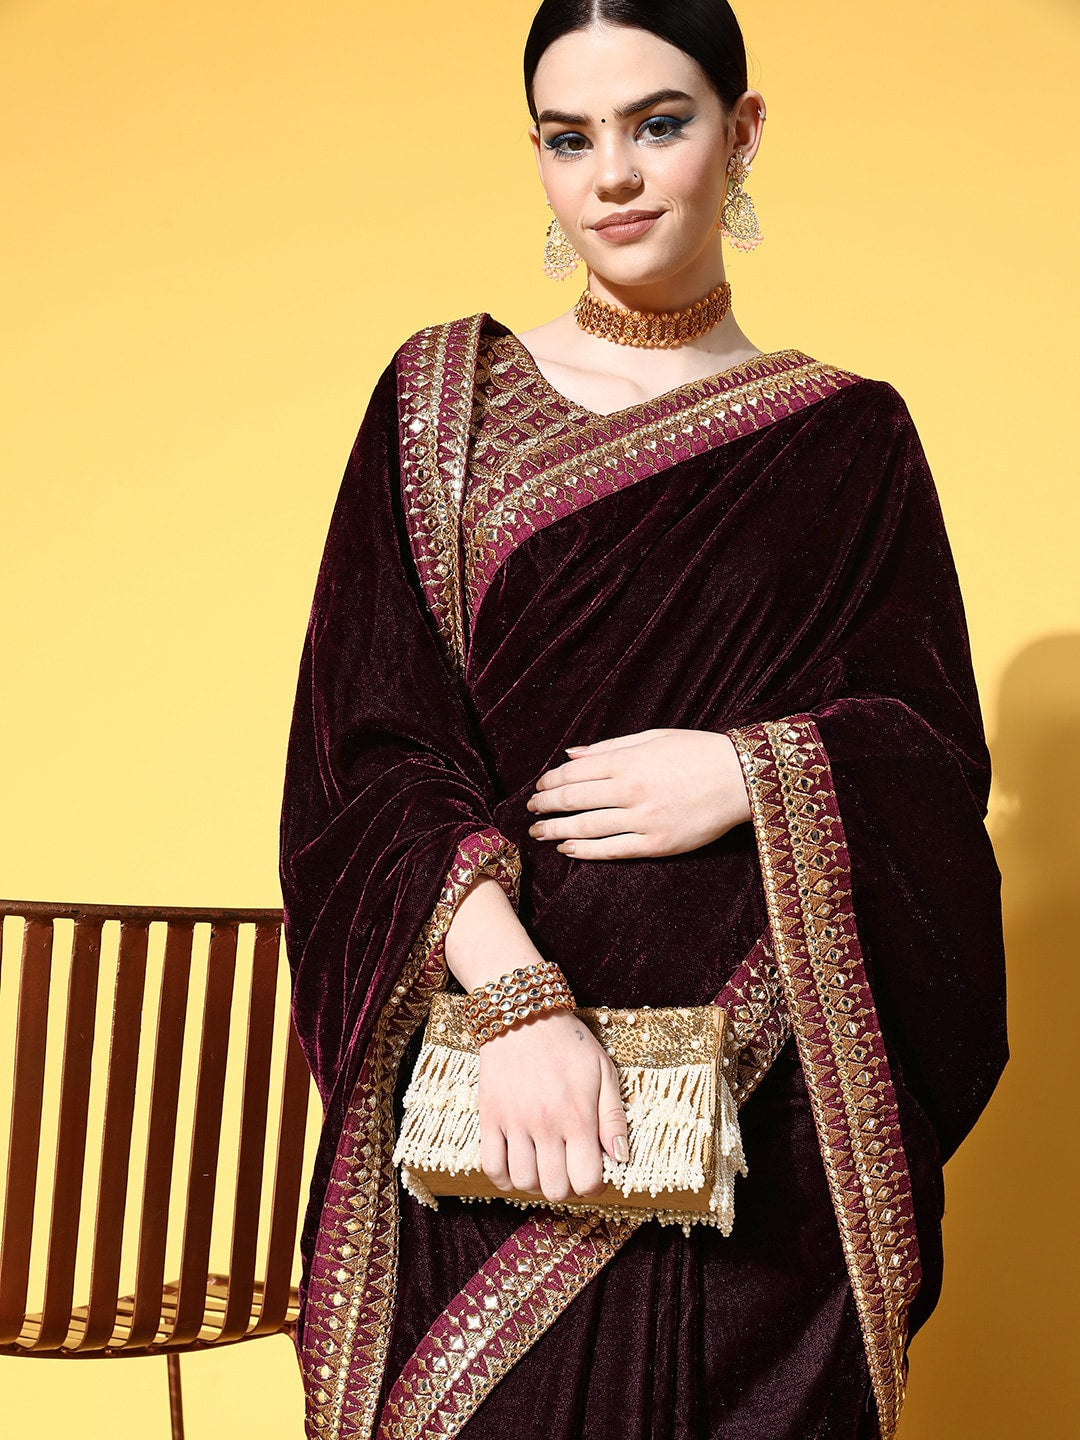 Solid Sarees - Buy Solid Sarees online in India